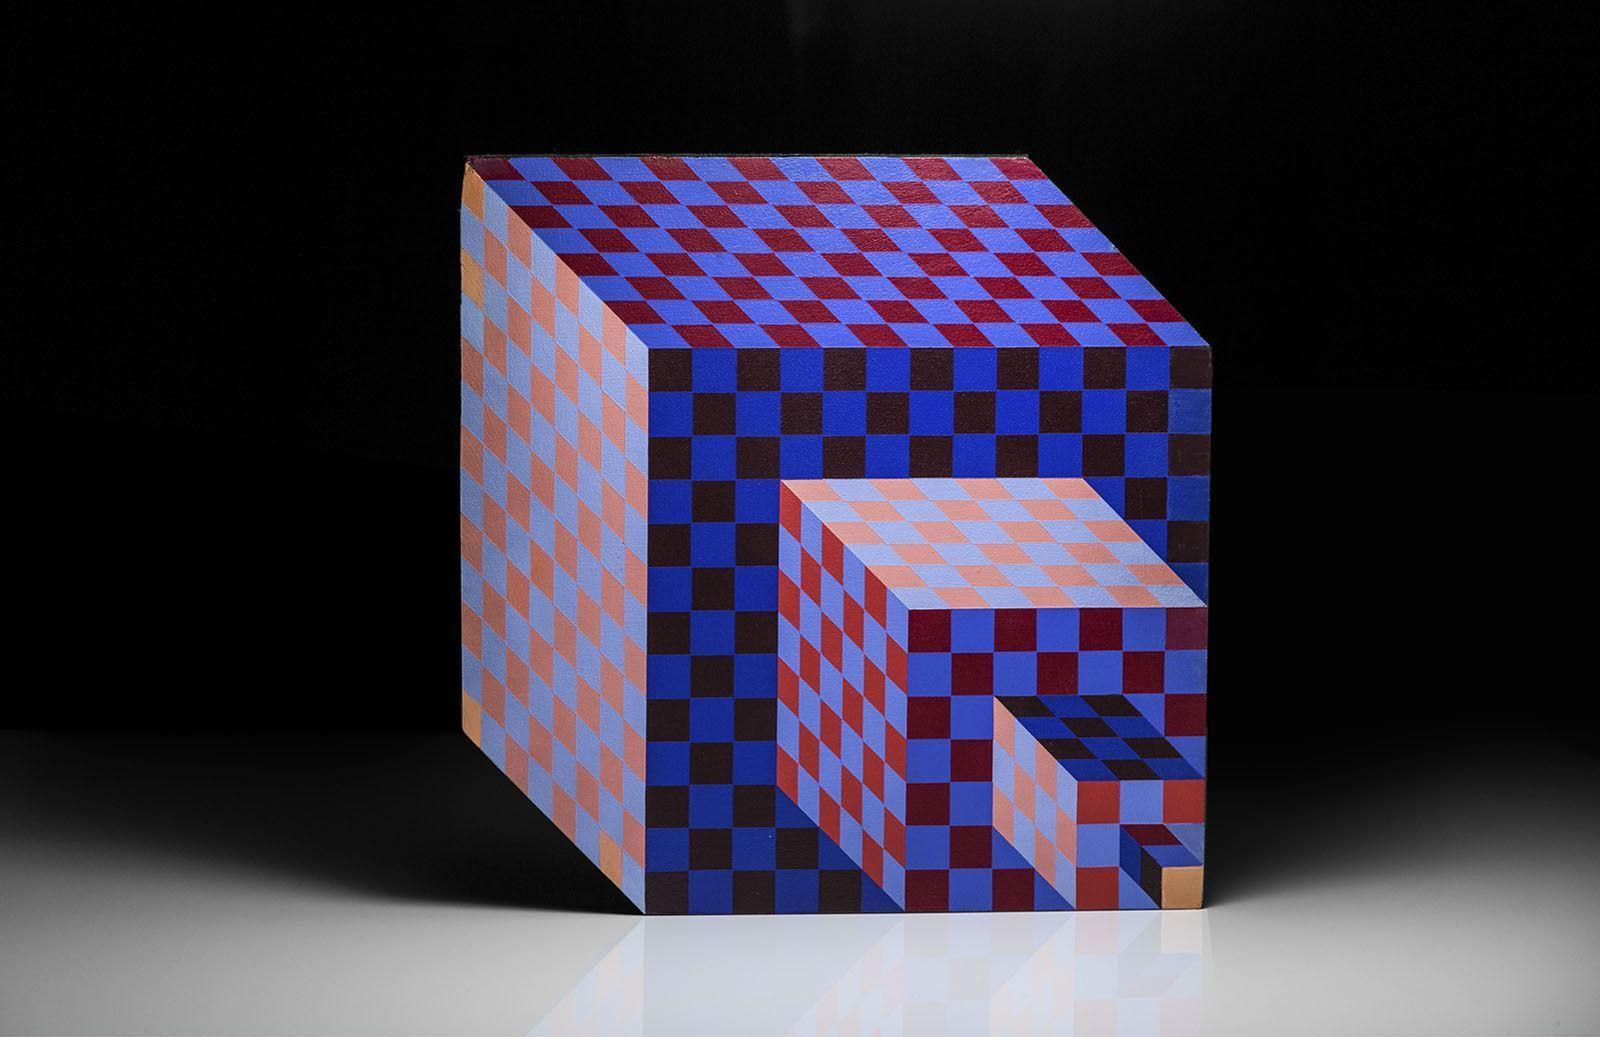 Artist:Victor Vasarely
Title: Felhoe 
Medium: Sculpture Hand Painted on Wood
Size: 15.7' x 15.4' 
Edition Size: 19/100

Year: 1989
Condition: Perfect museum quality condition with minor handling blemishes along the resting area.  Listed as best